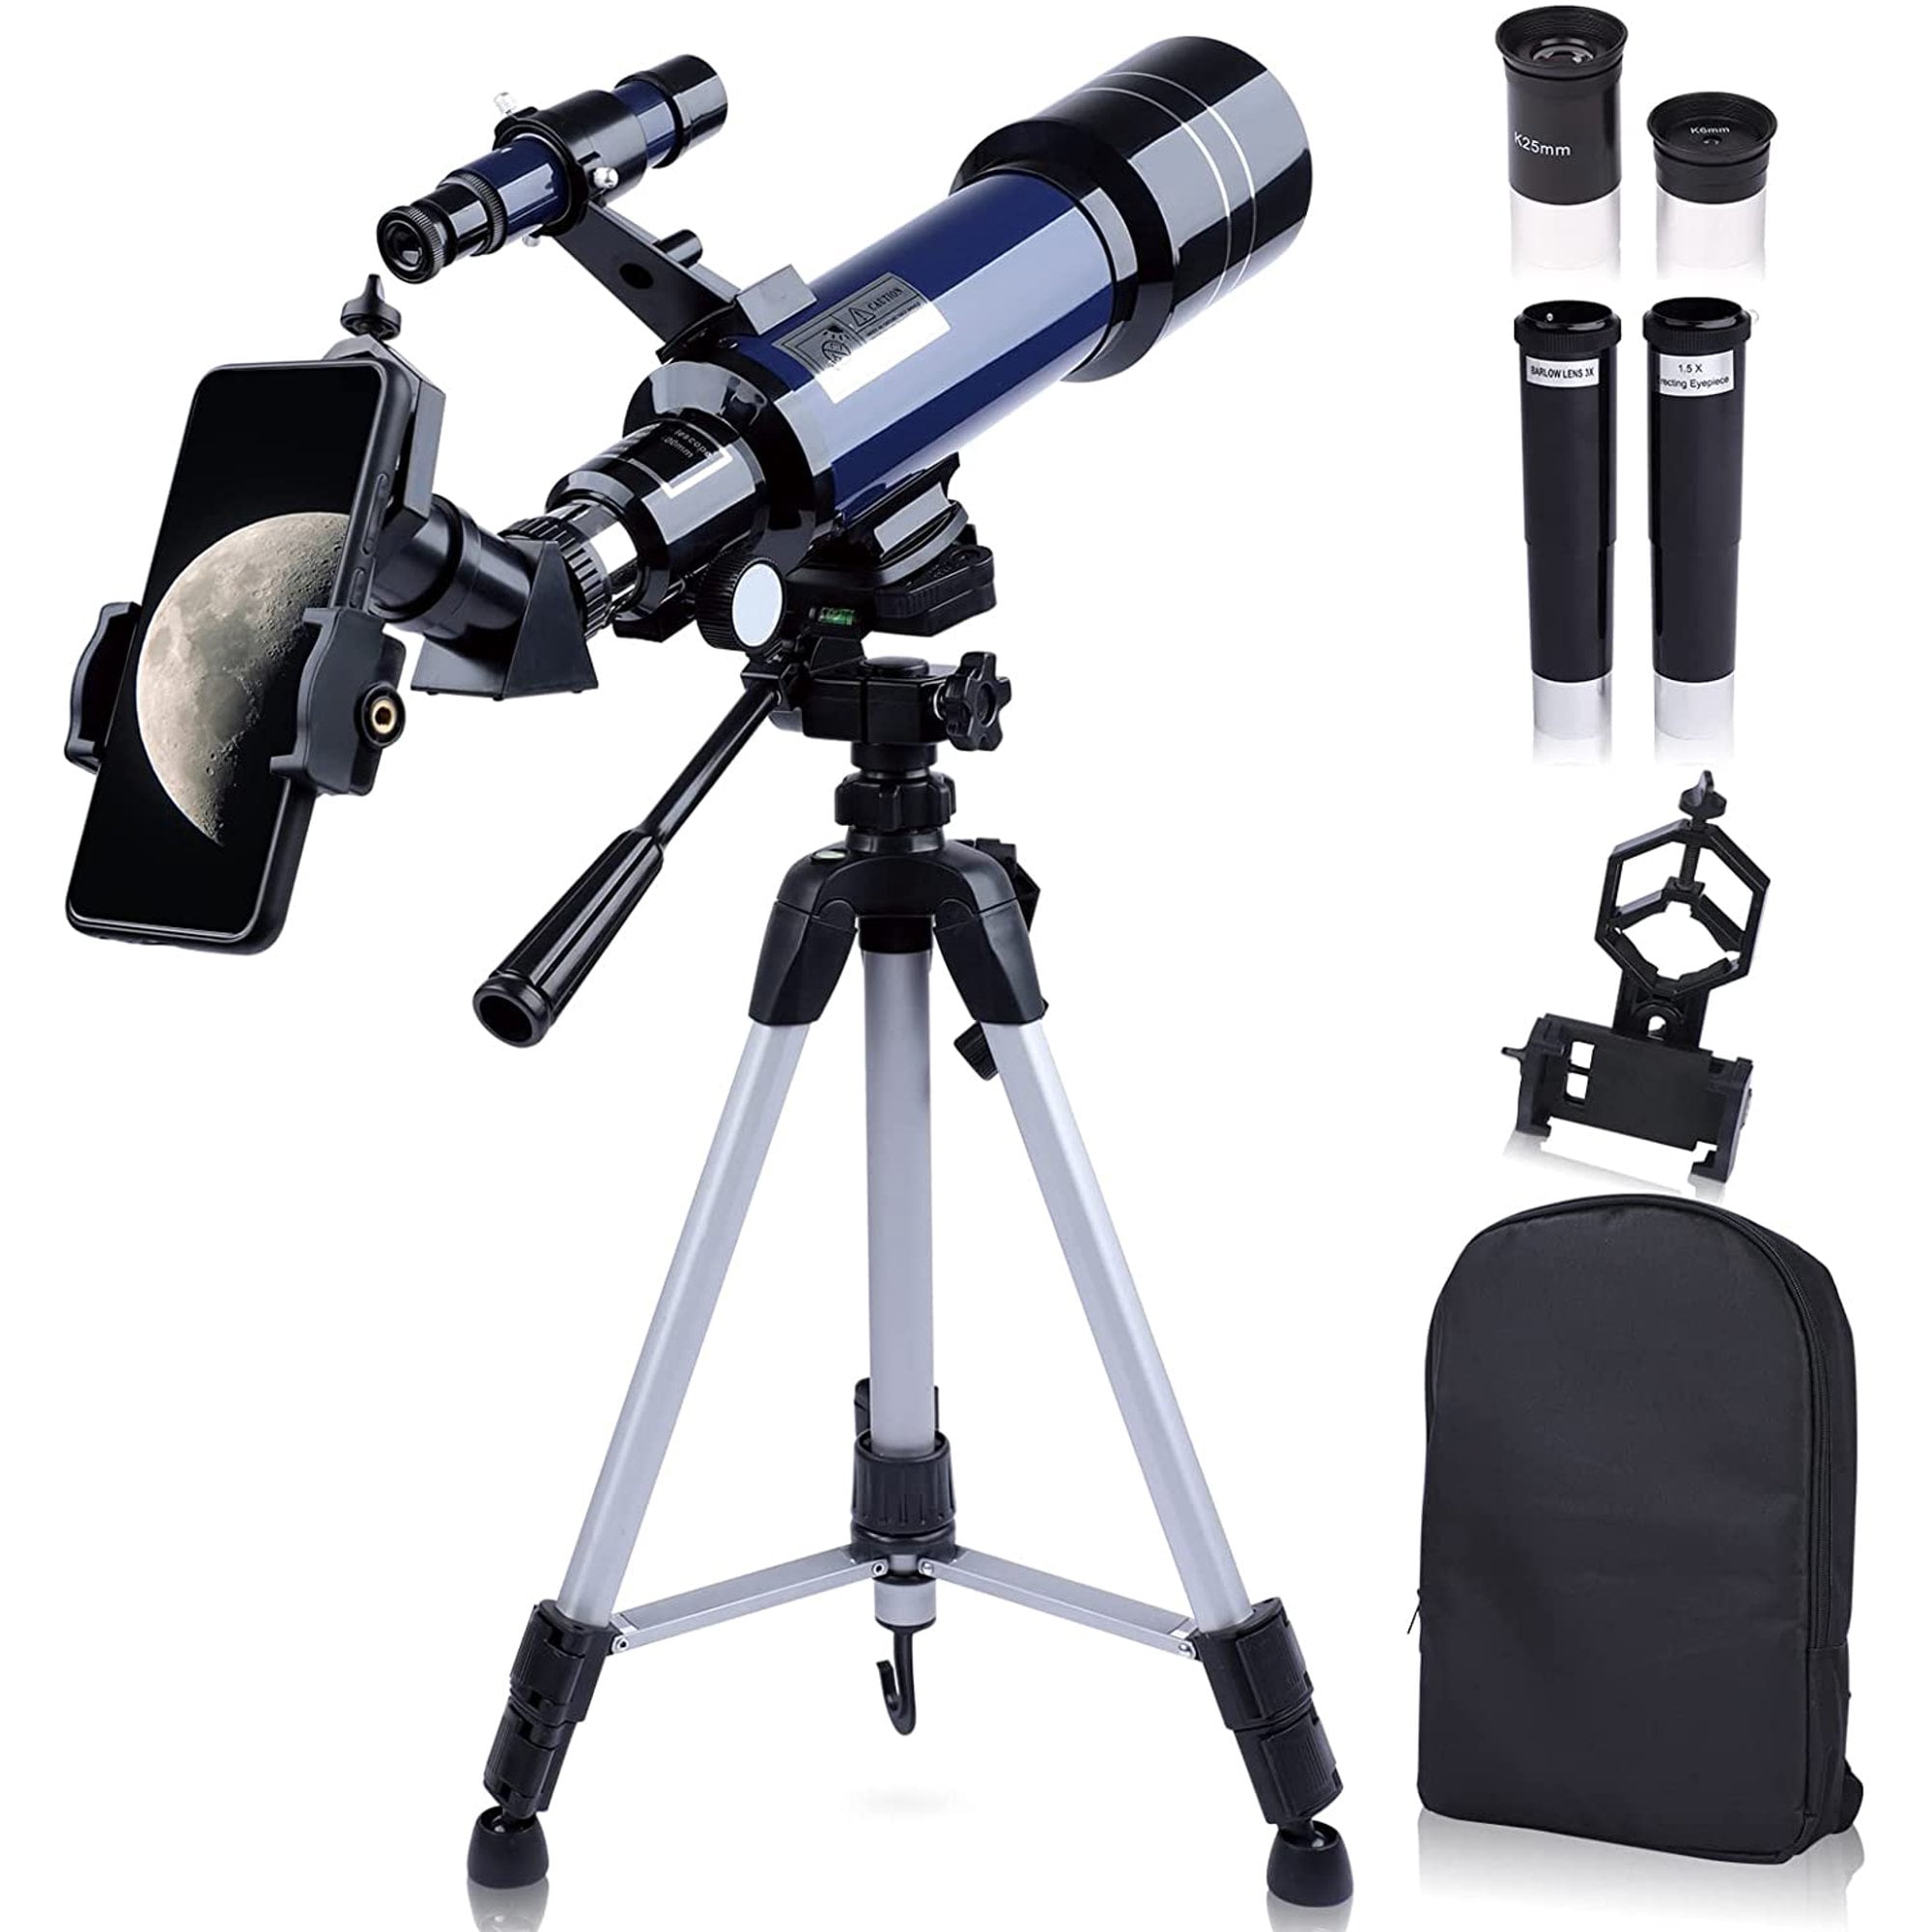 70mm Telescopes Refractor to Observe Moon and Planet black Telescopes for Adults 400mm Astronomy Telescopes for Kids & Beginners Astronomical Refractor Telescope with Finder Scope & Tripod f/5.7 